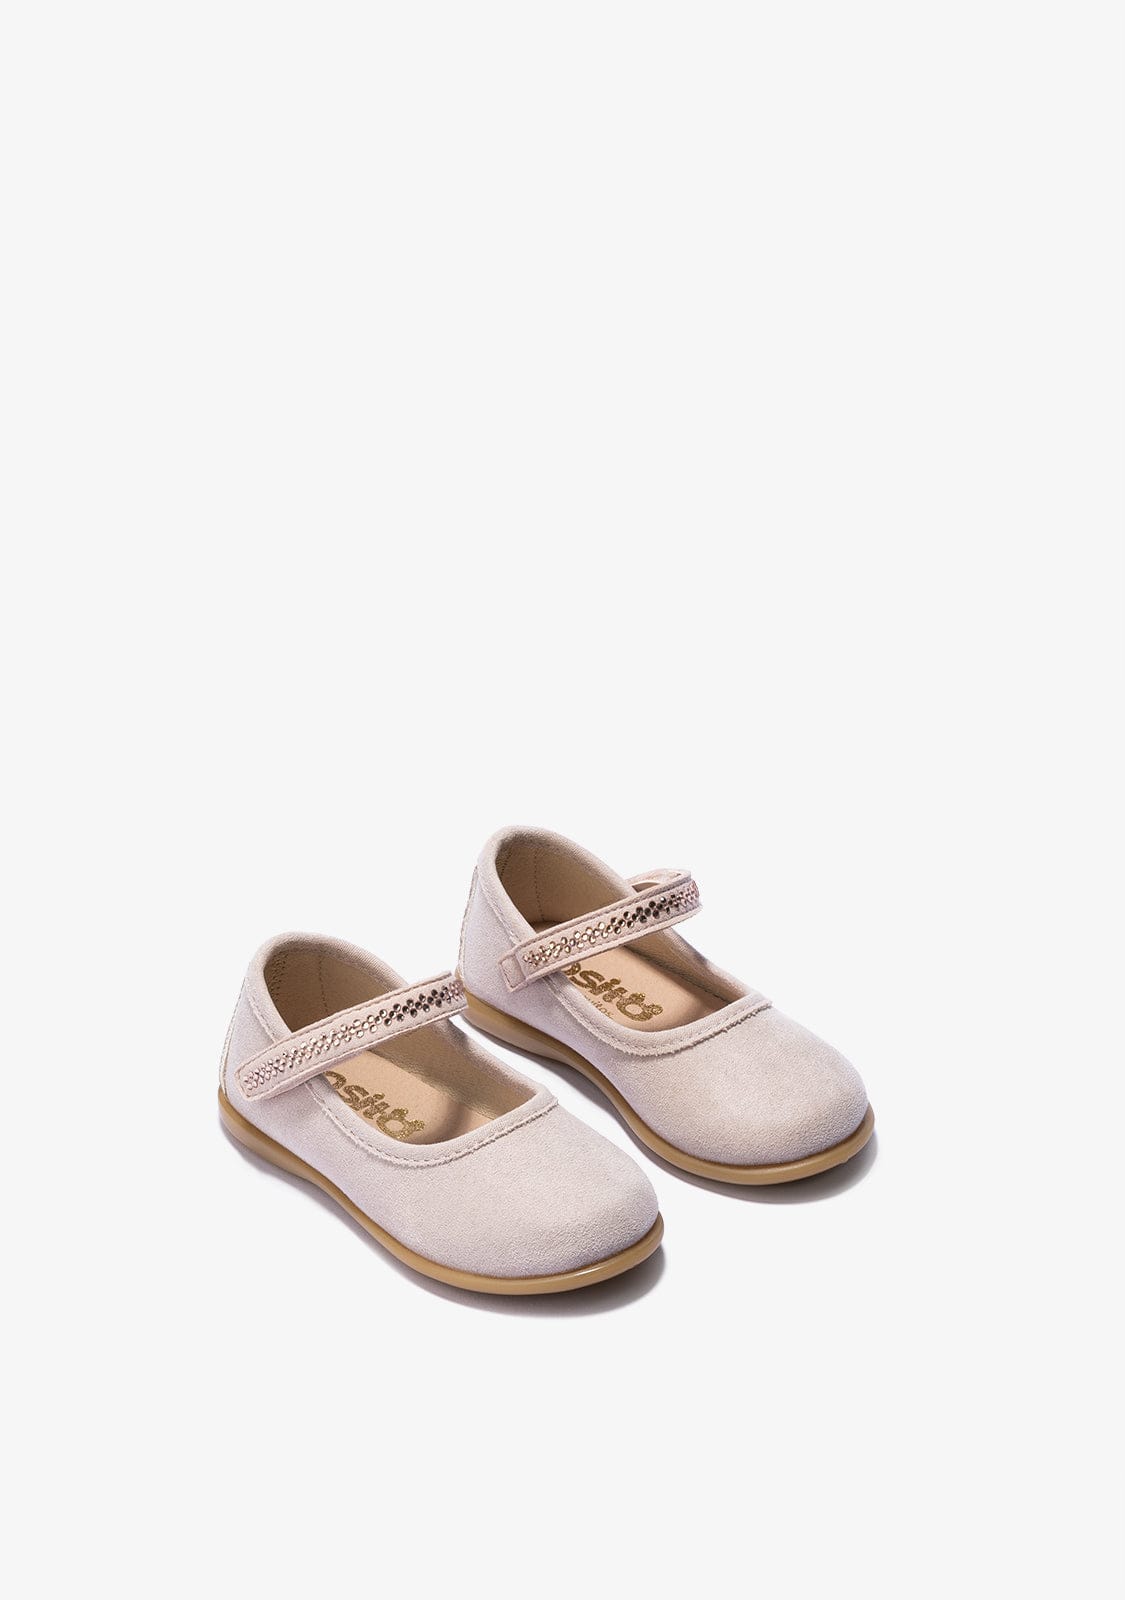 OSITO Shoes Baby's Pink Adherent Strip Ballerinas